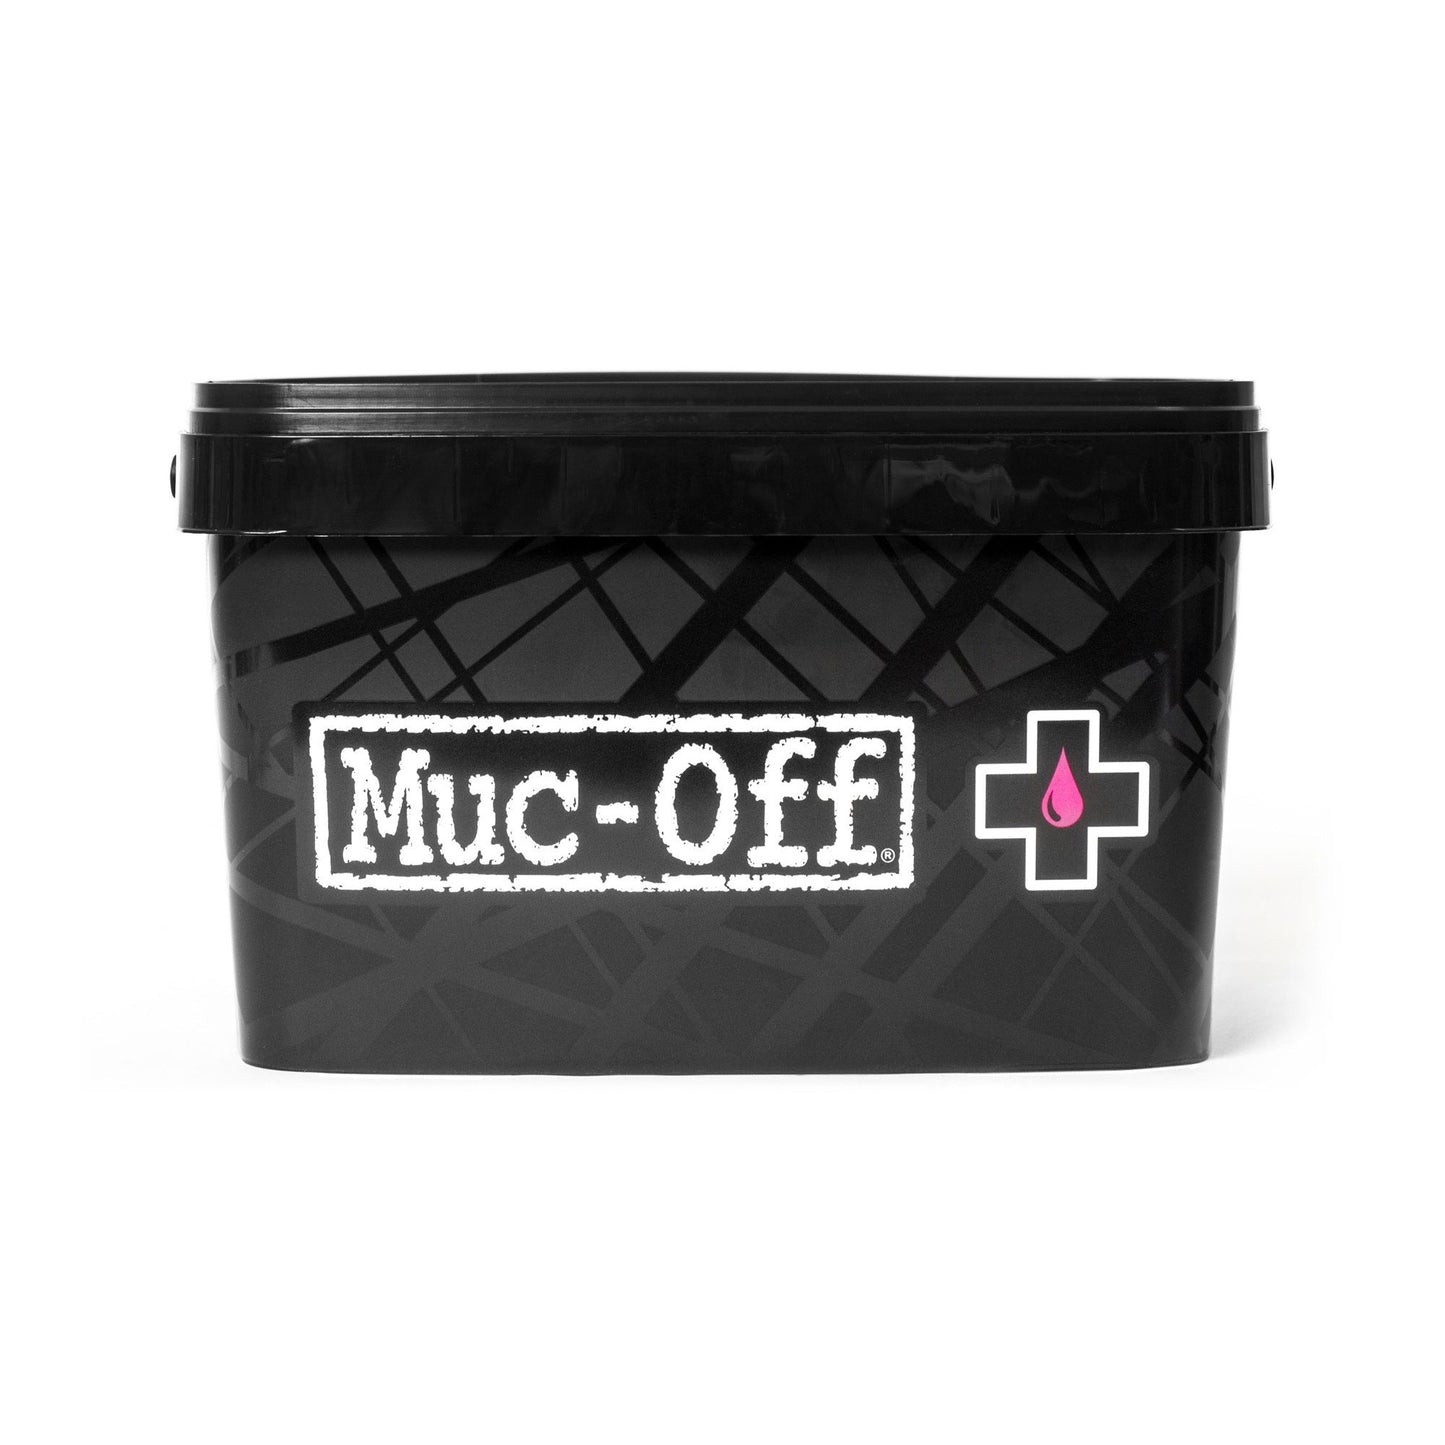 Muc-Off 8 IN 1 BICYCLE CLEANING KIT